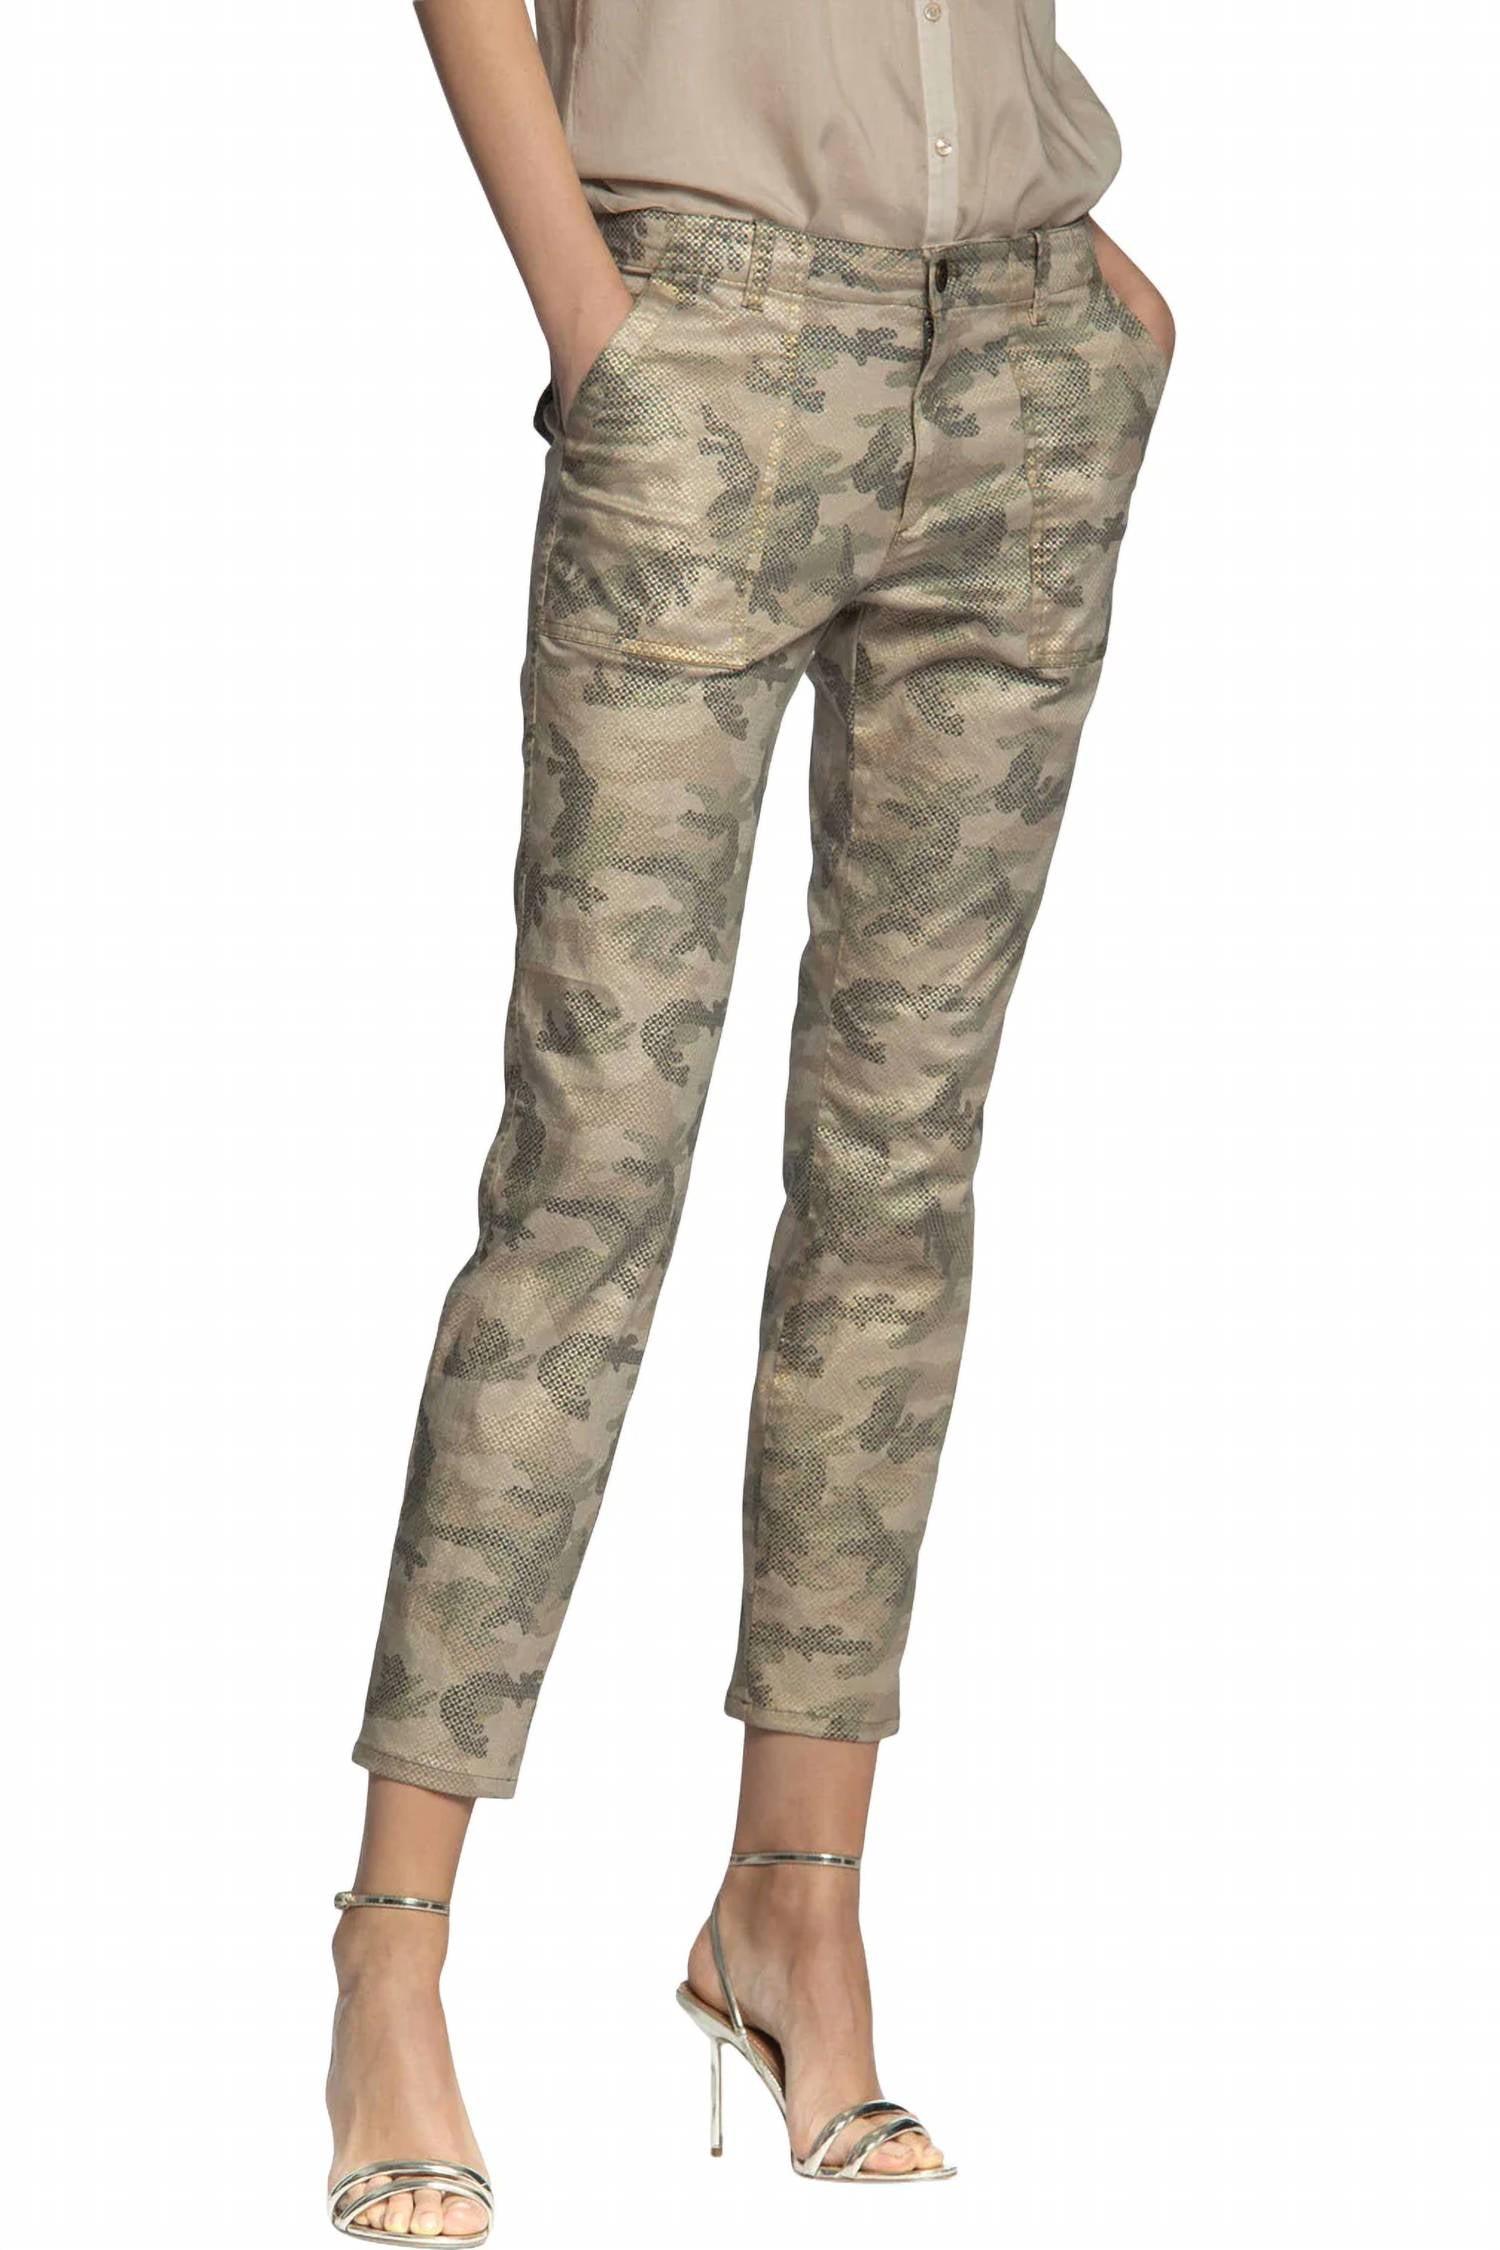 Mason's Jaqueline Fatique Embossed Camo Pants in Natural | Lyst